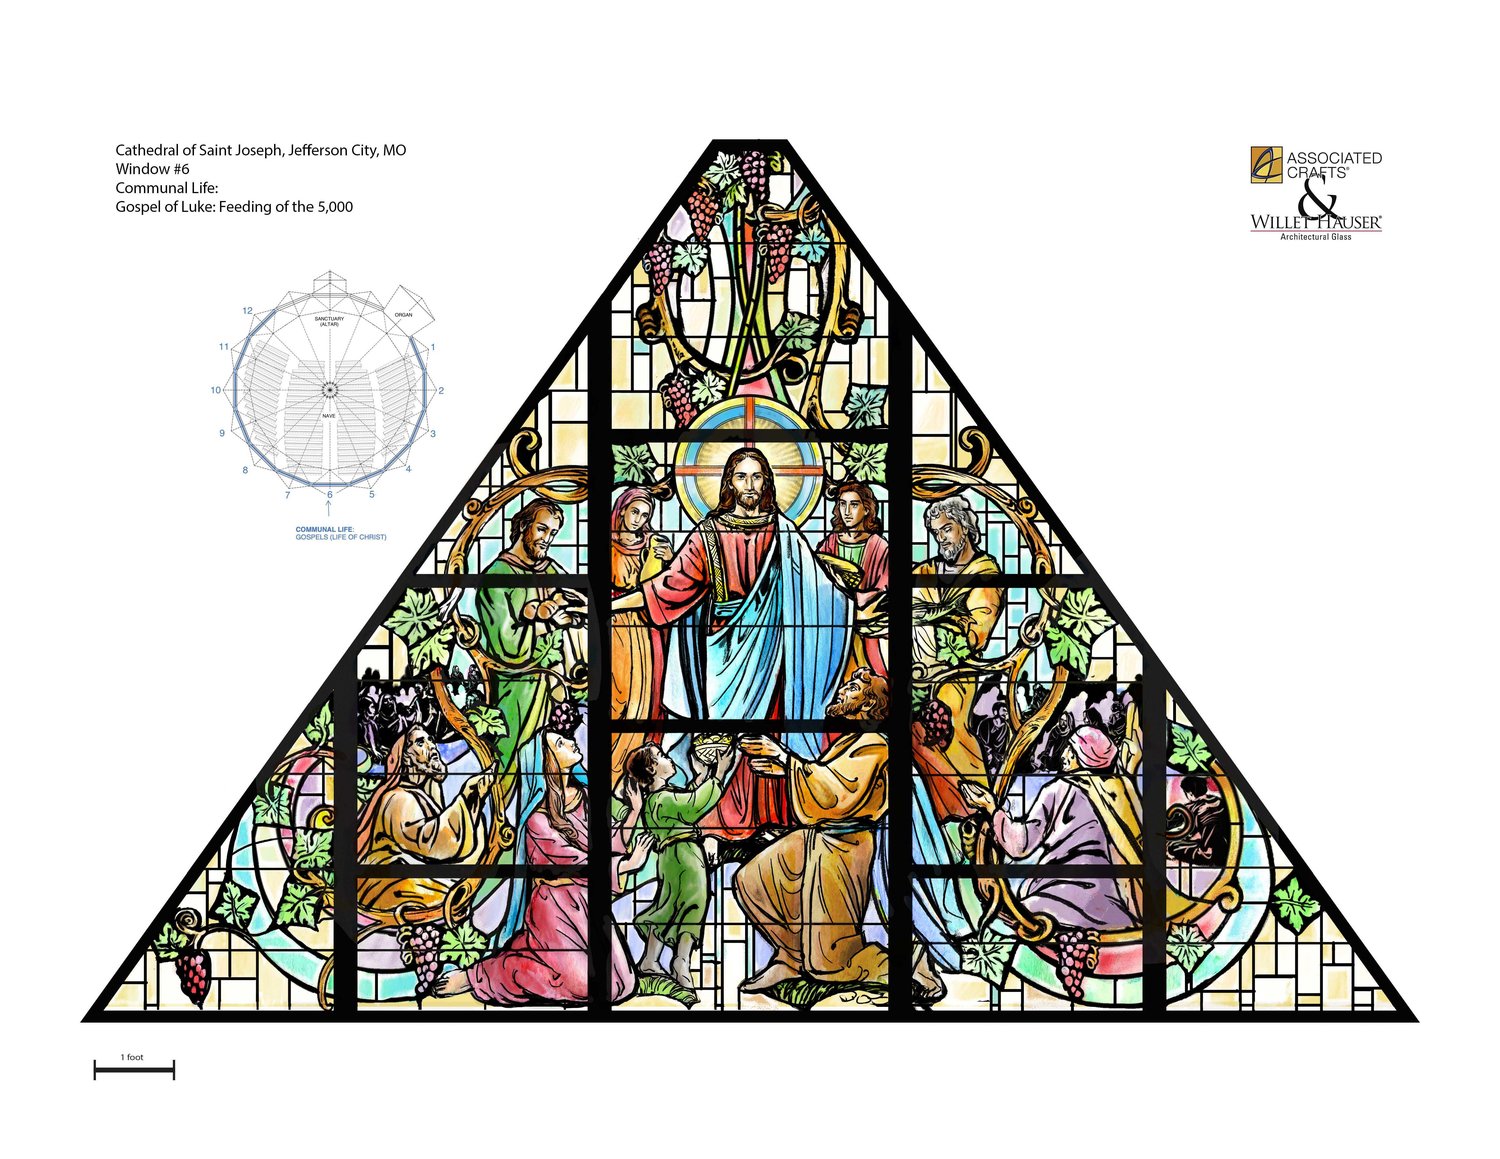 This is the final design from which artisans created the window depicting Jesus miraculously feeding the multitudes.